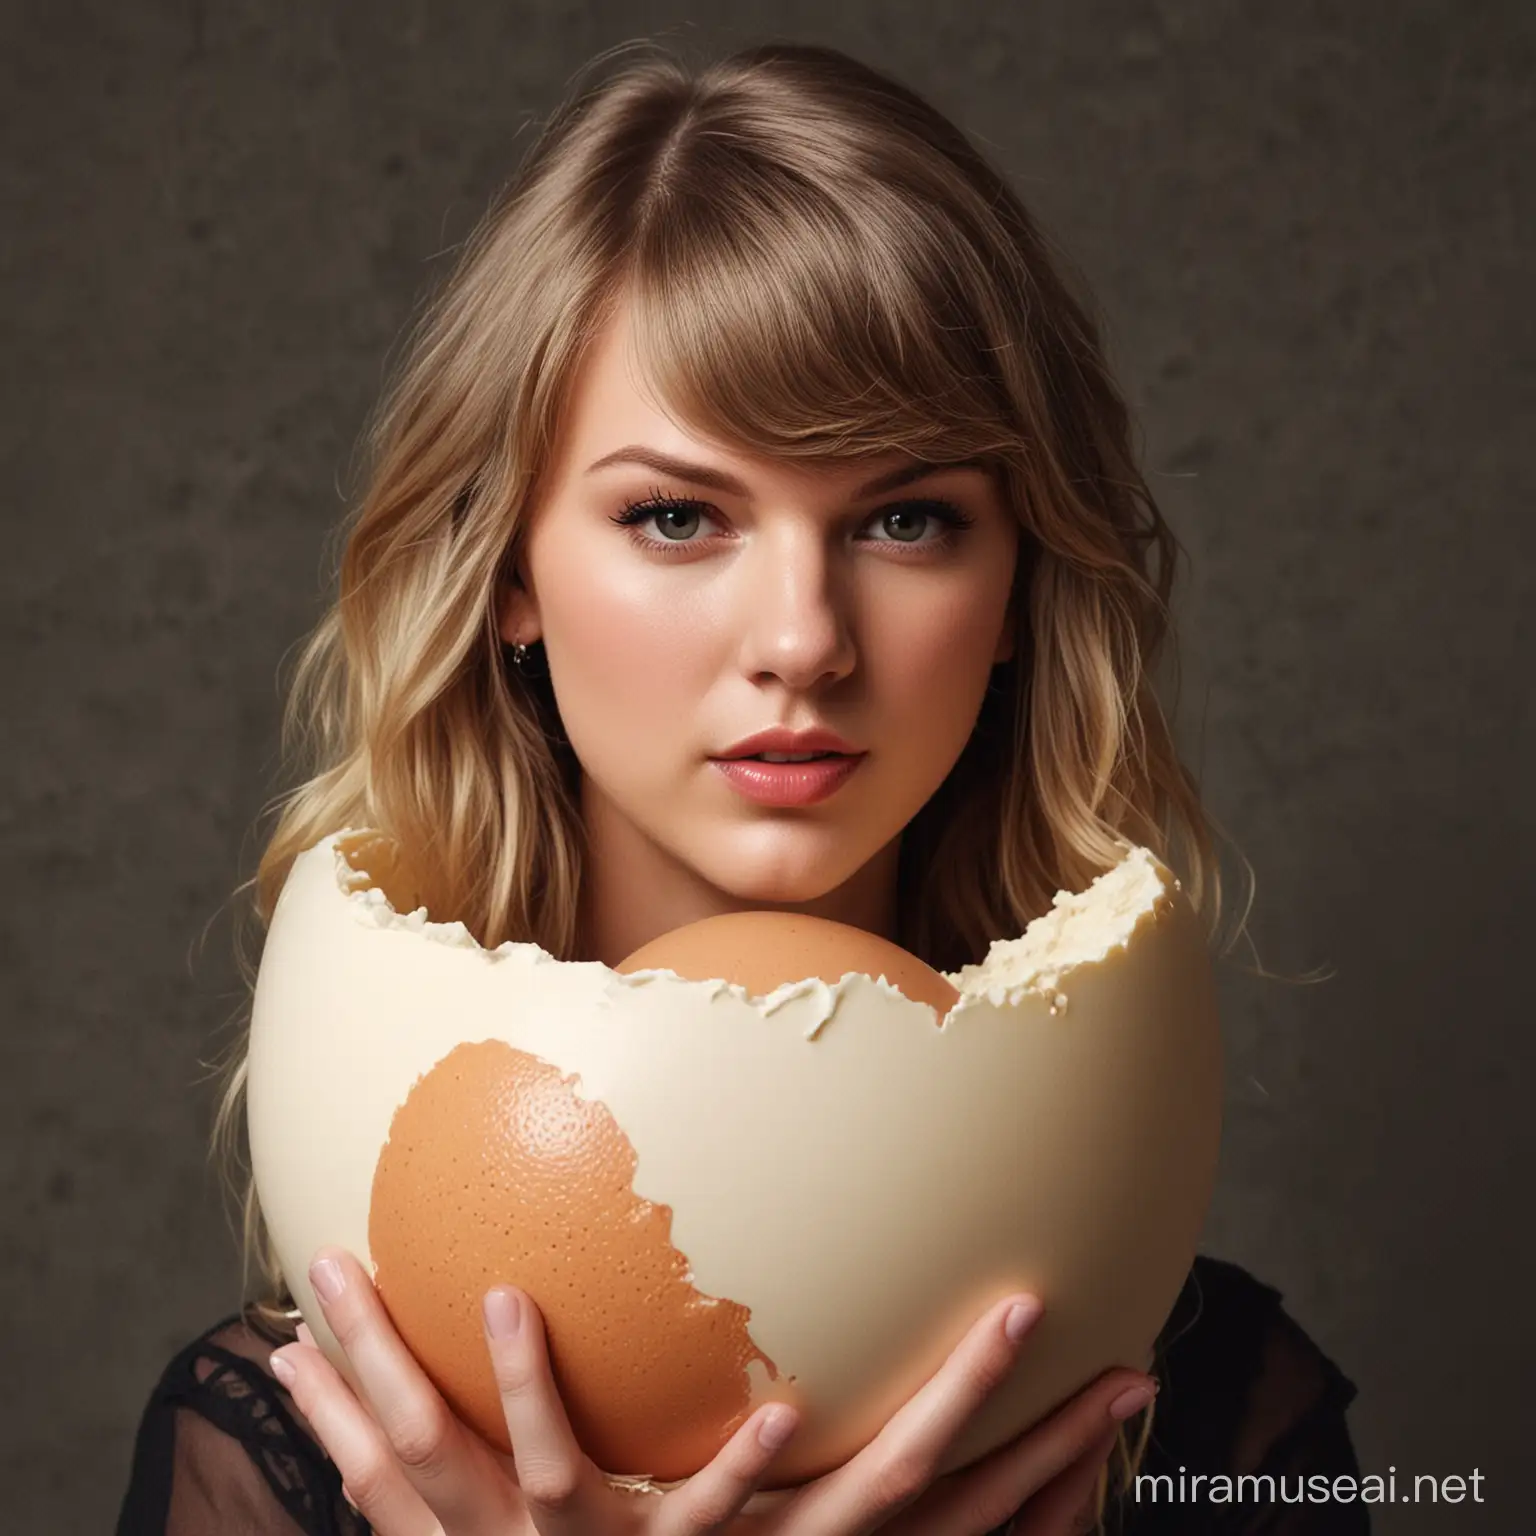 Taylor Swift Emerging from Egg with Mucus and Placenta